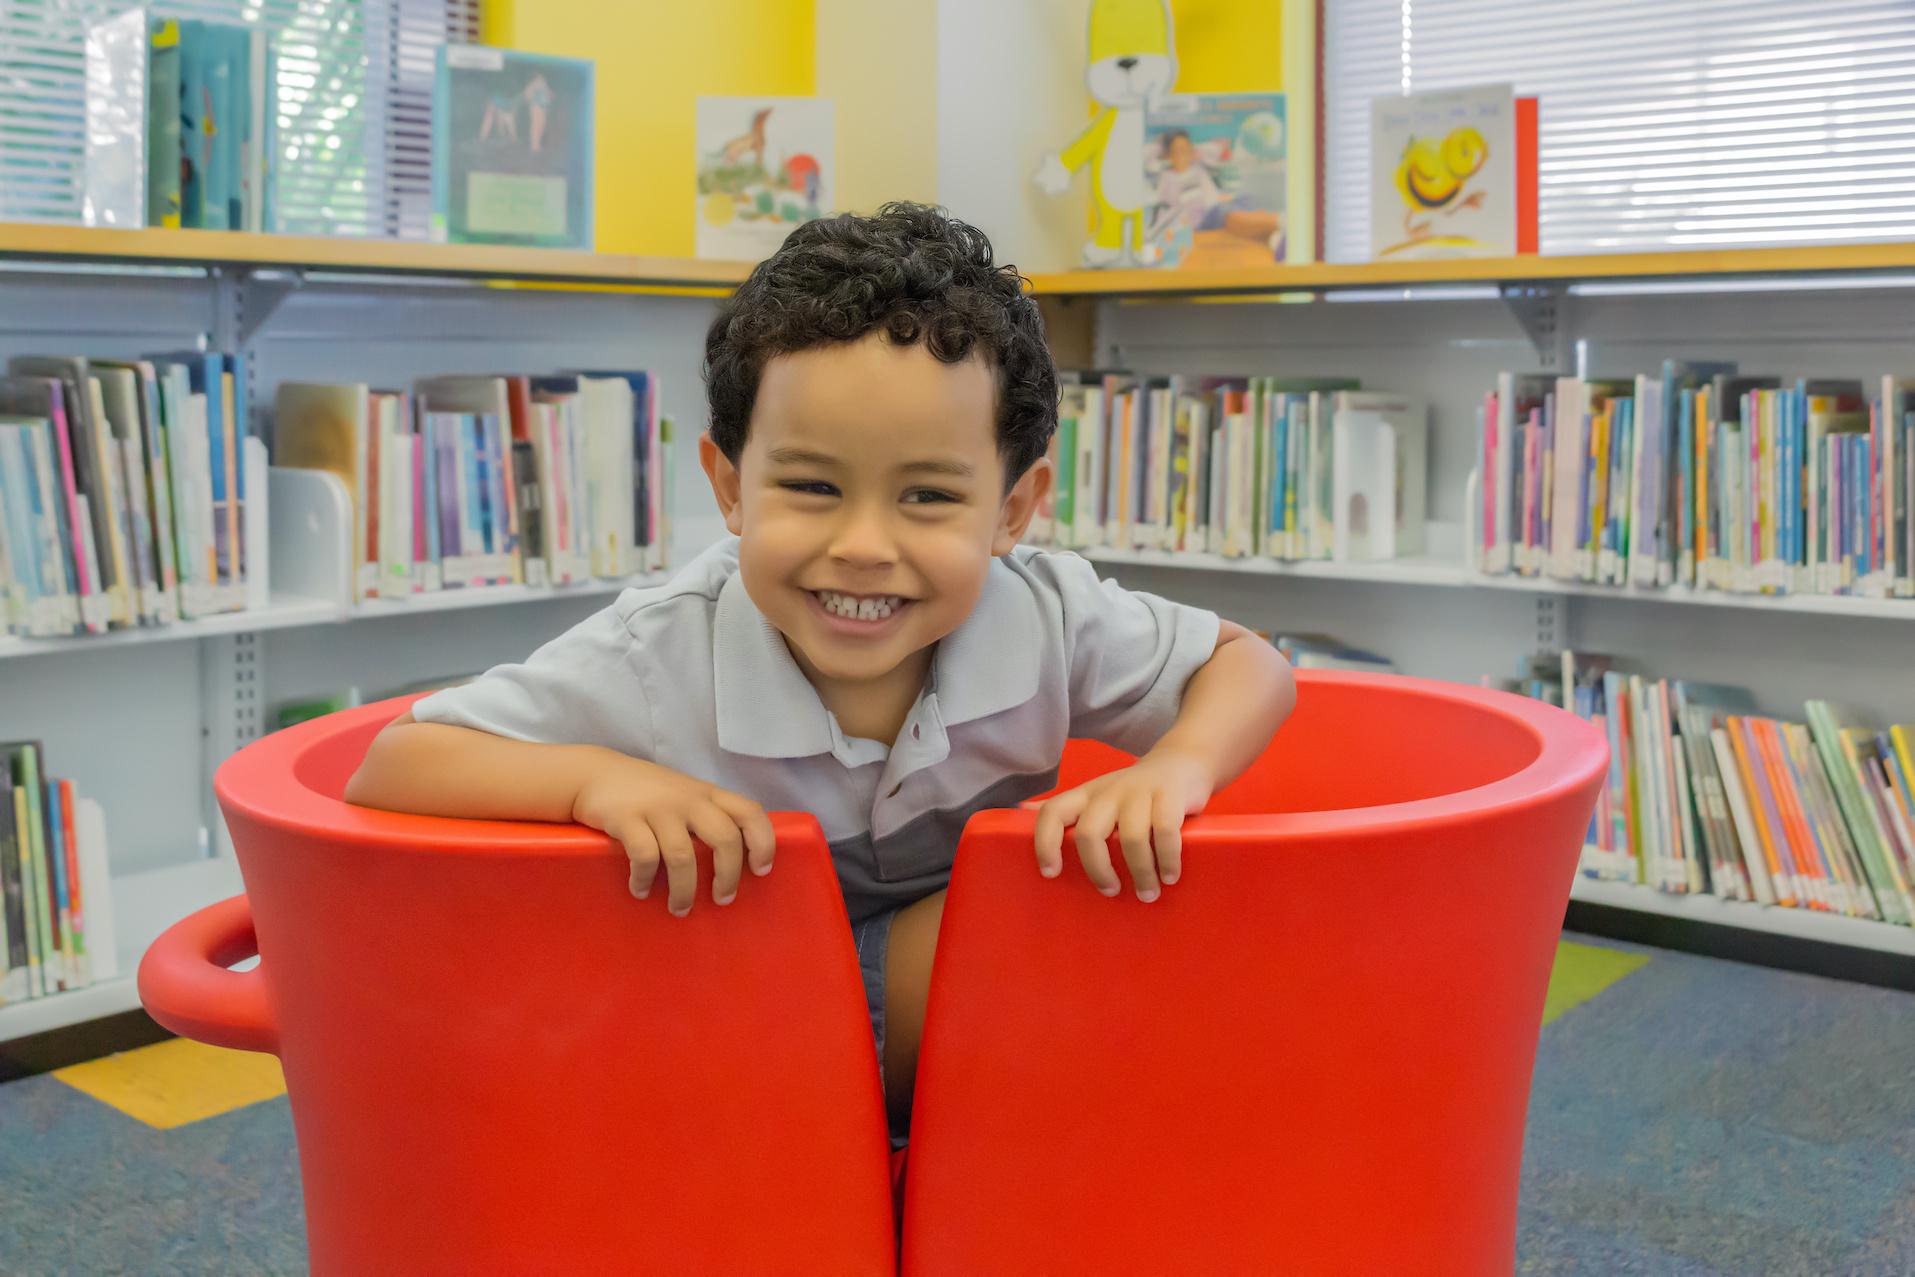 A smiling child at the library